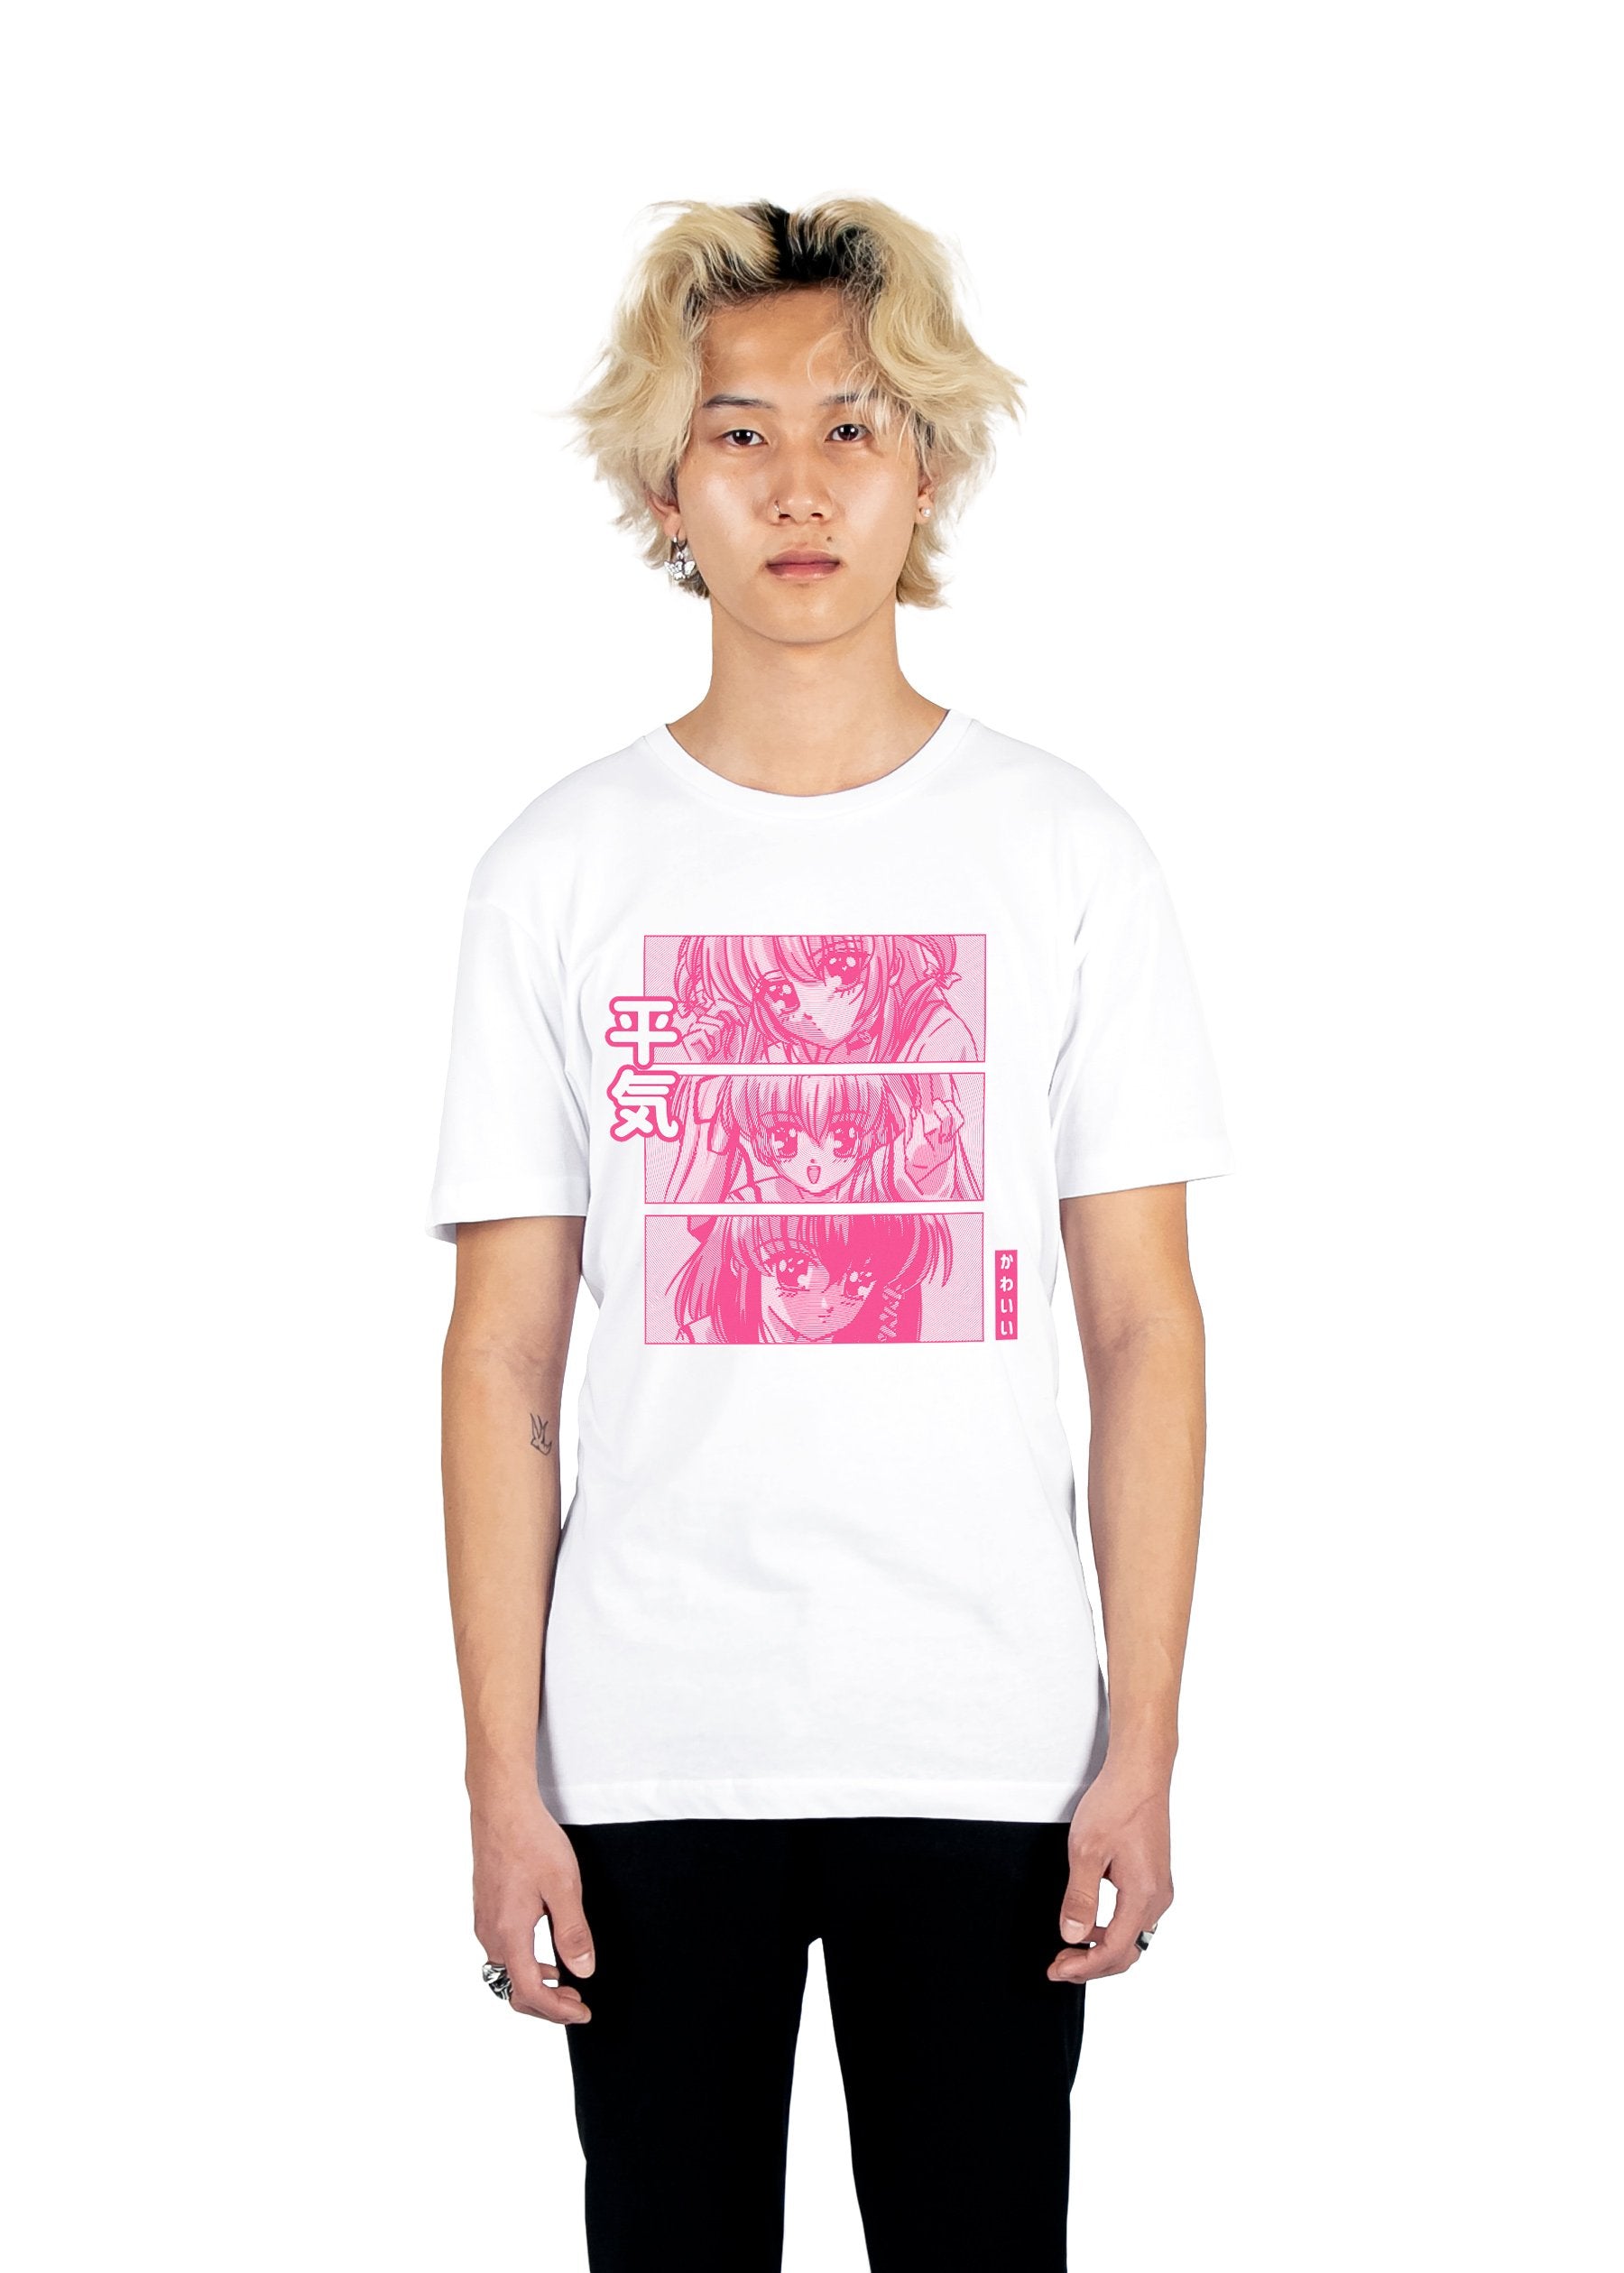 Why So Sad Tee Graphic Tee DTG White S